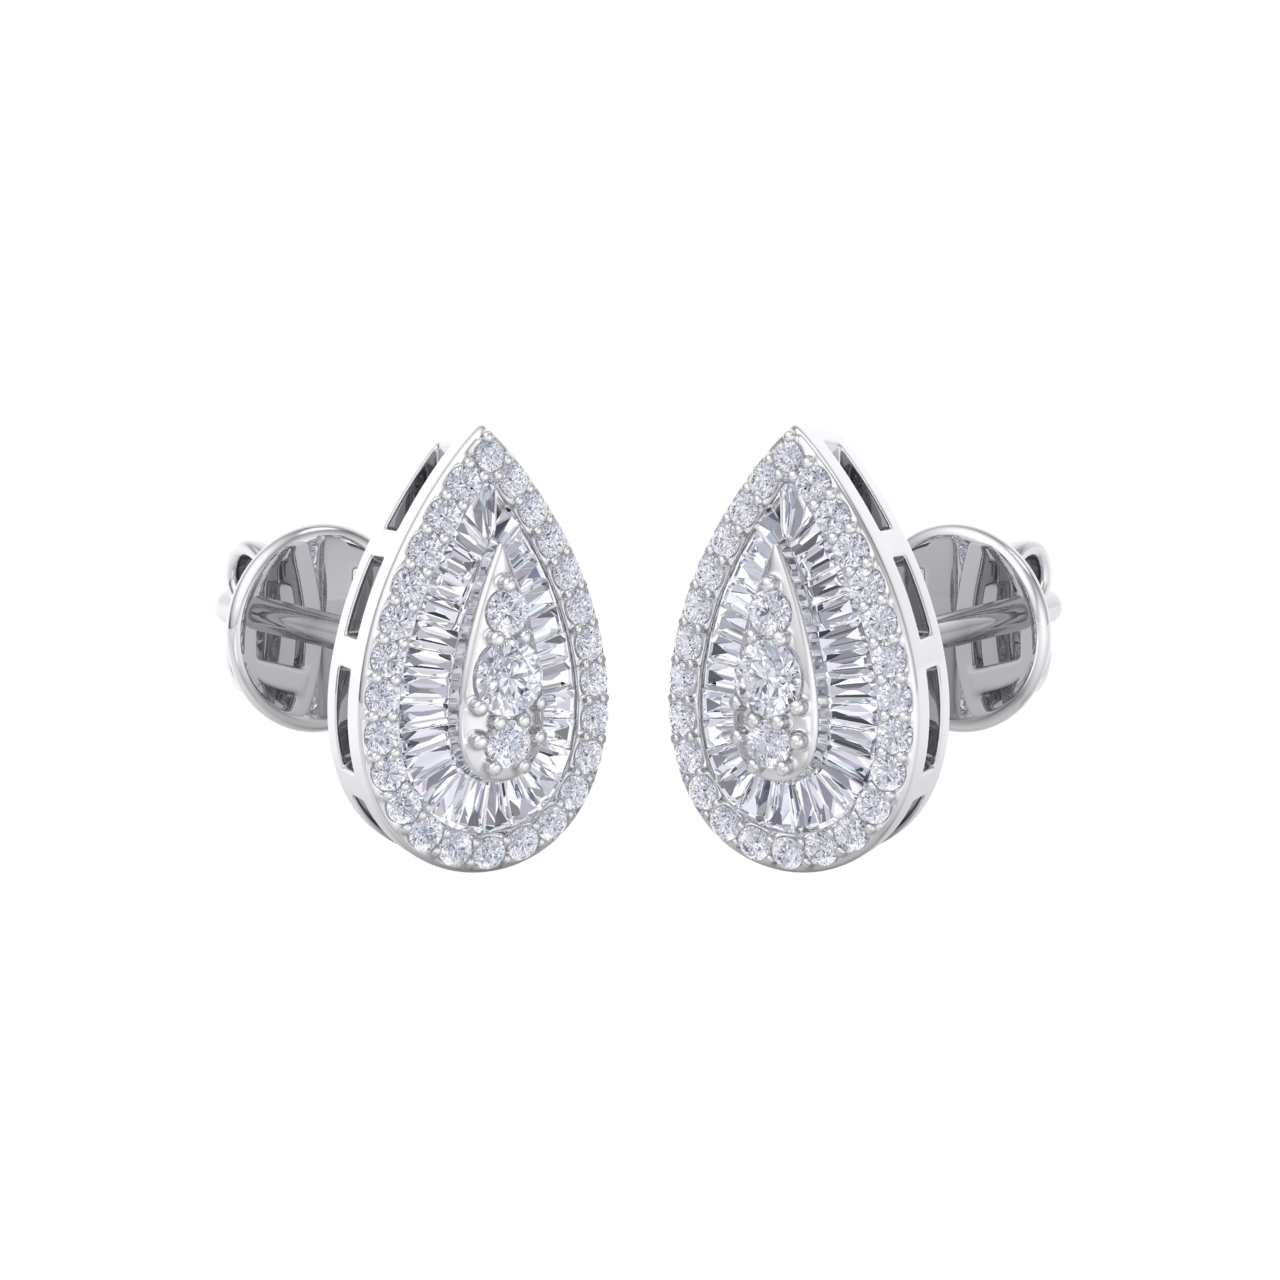 Pear shaped earrings in white gold with white diamonds of 0.79 ct in weight